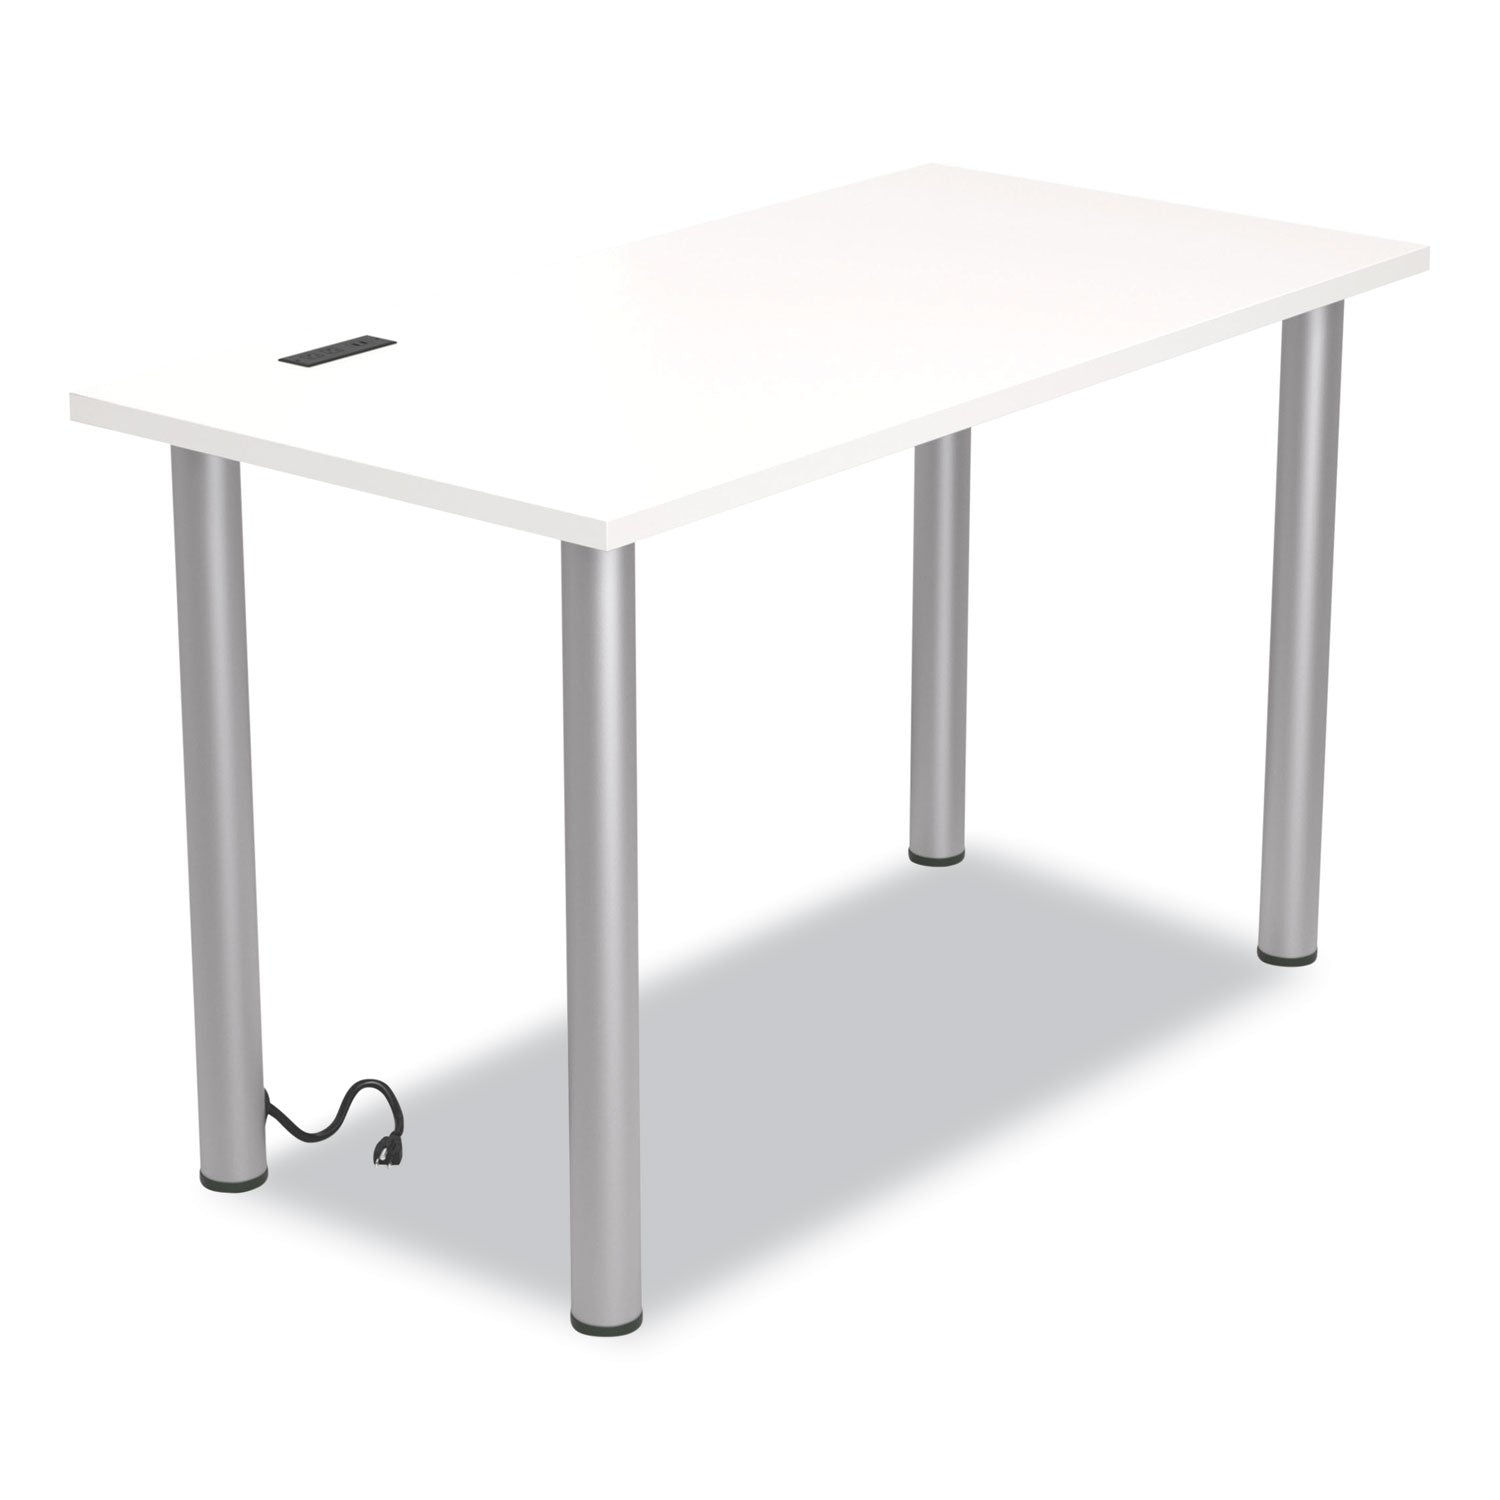 essentials-writing-table-desk-with-integrated-power-management-475-x-237-x-288-white-aluminum_uos24398970 - 1